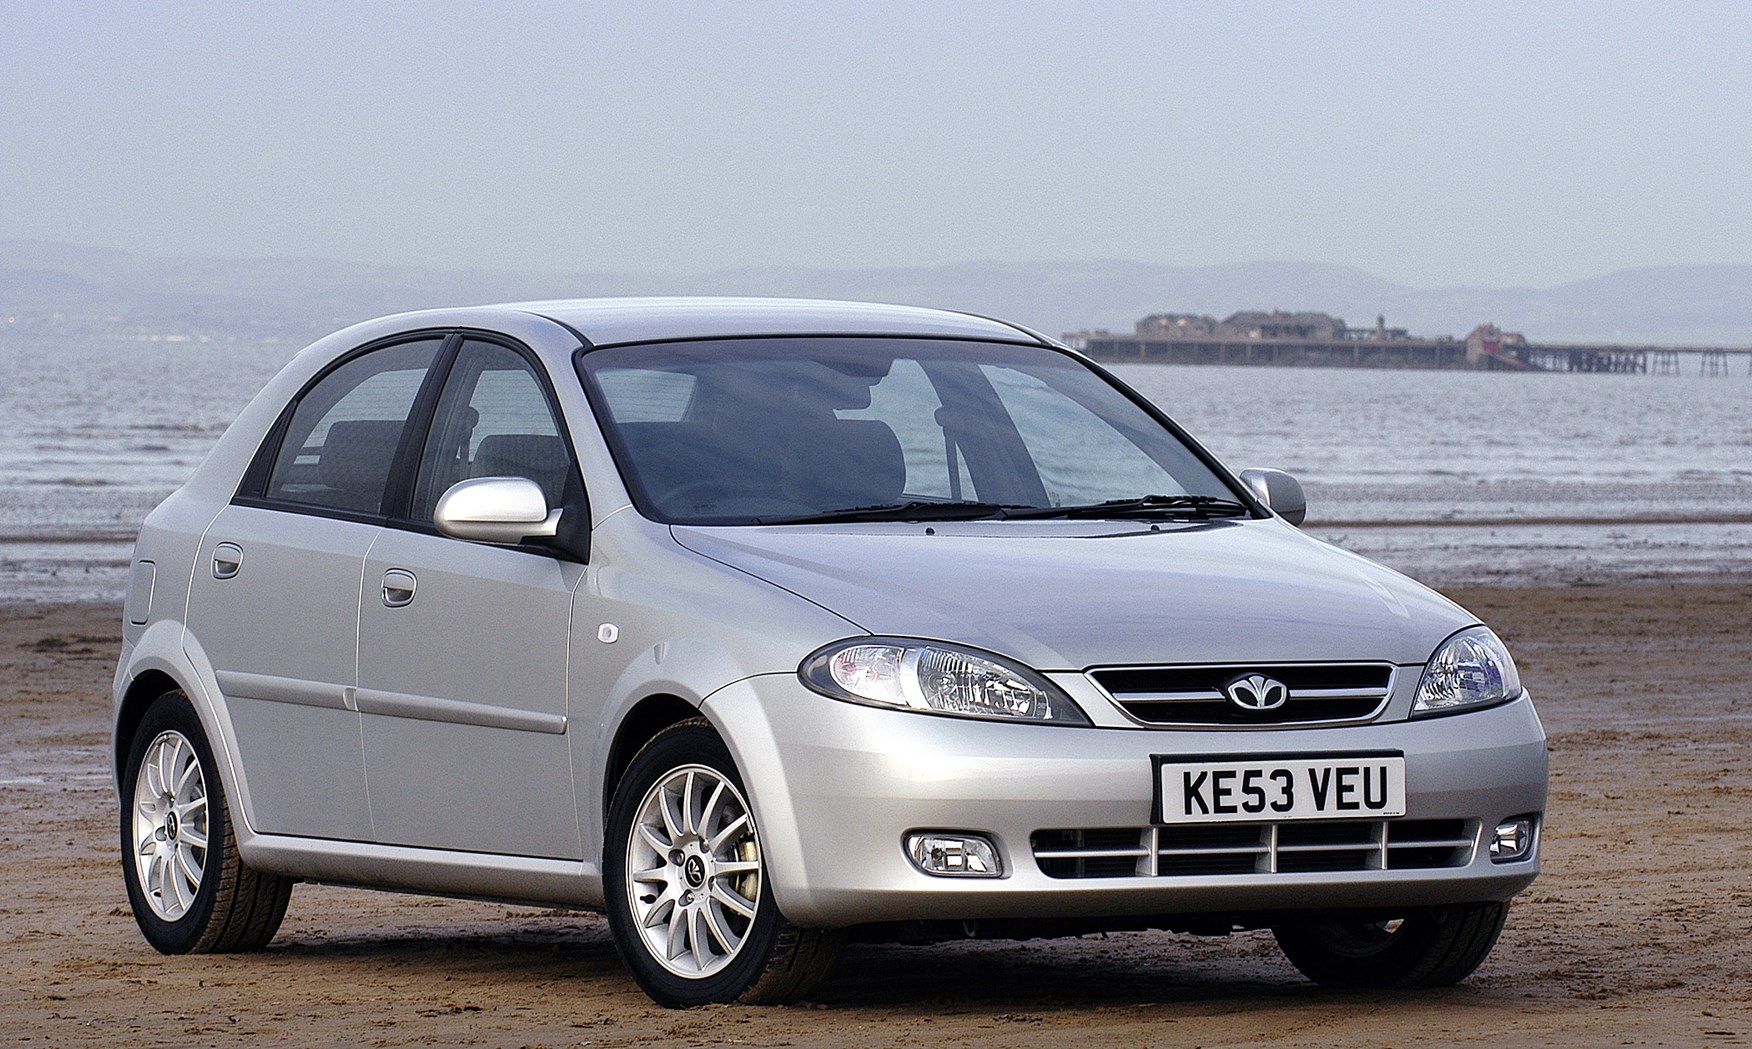 Daewoo Lacetti 2004 parkers co